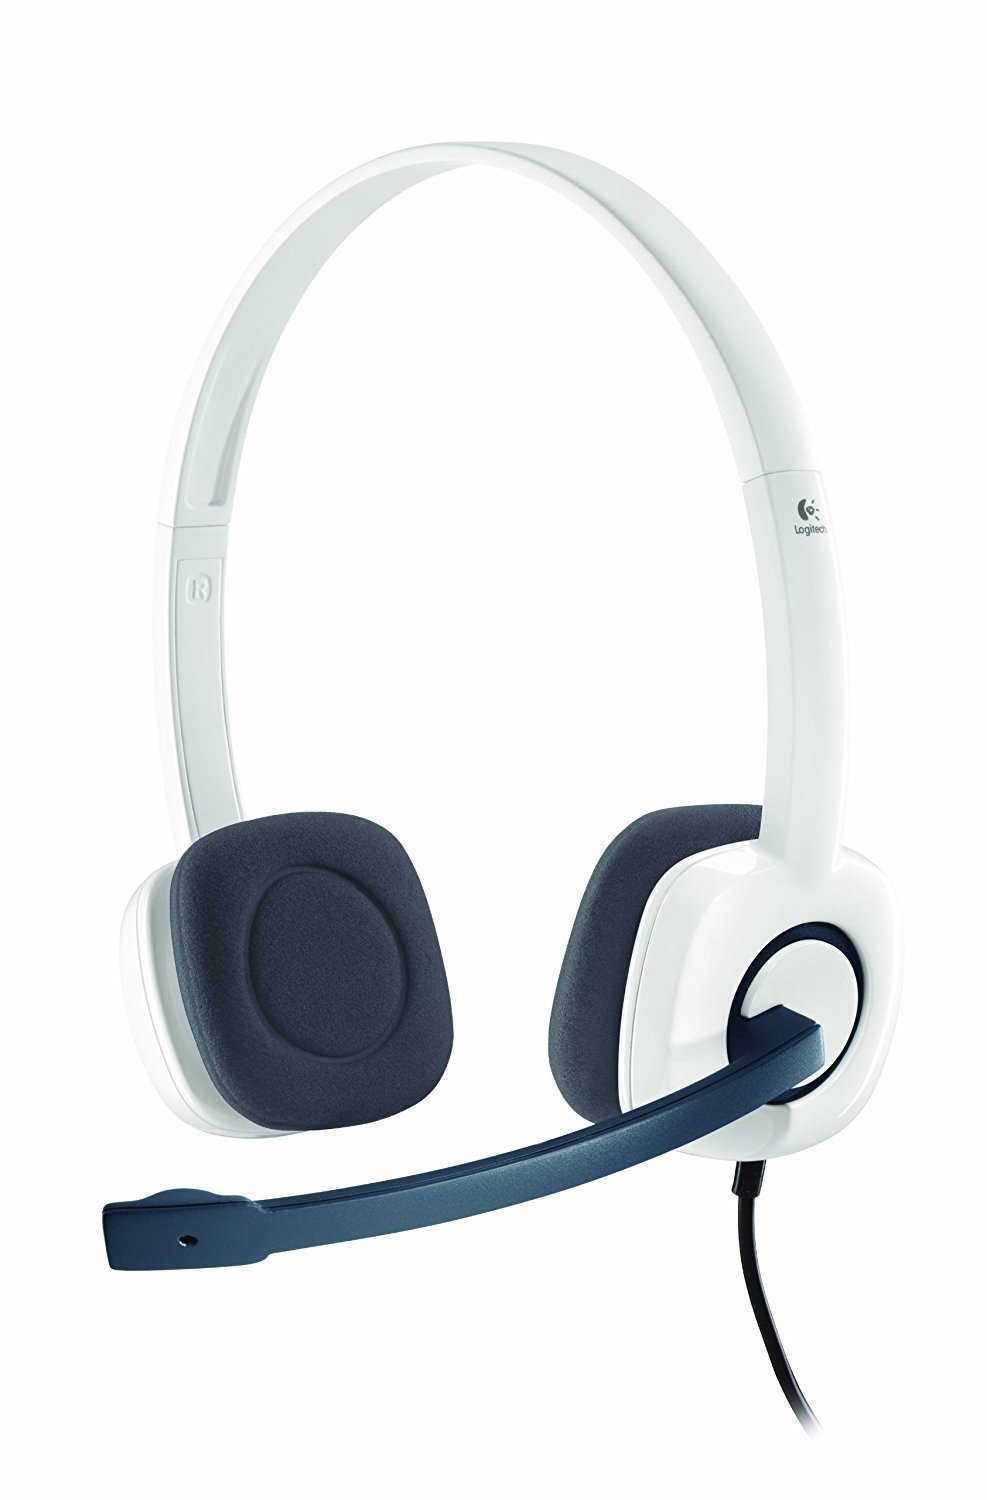 Logitech H150 Stereo Headset with Mic, White